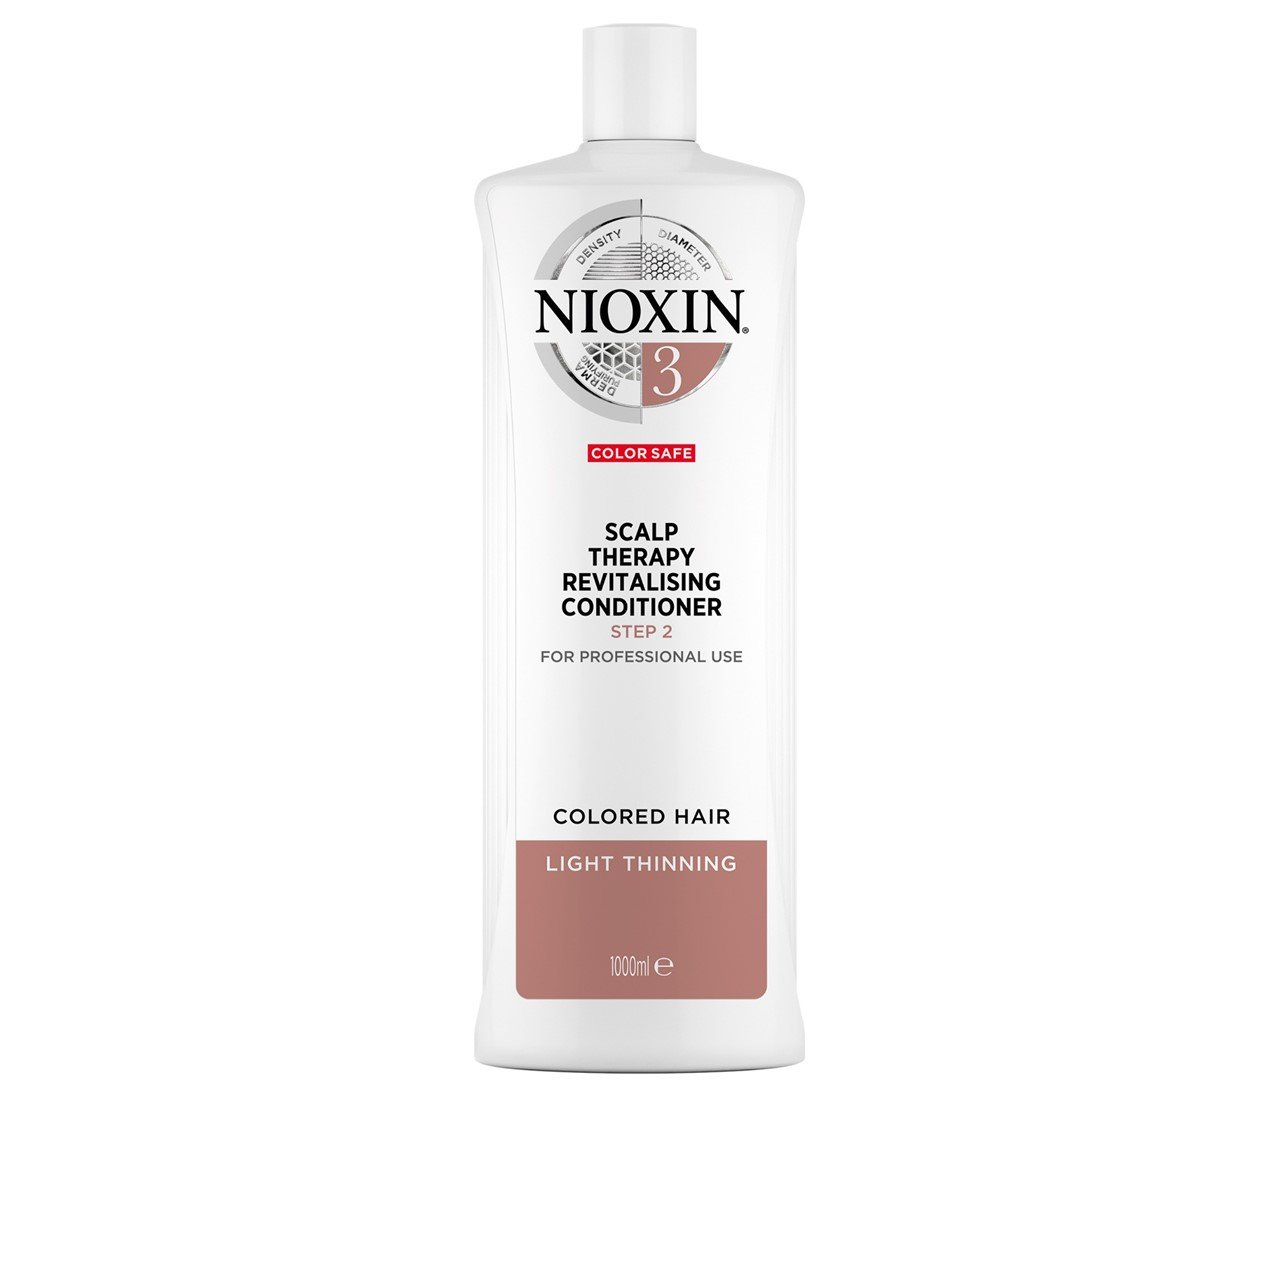 Nioxin System 3 Scalp Therapy Conditioner 1L